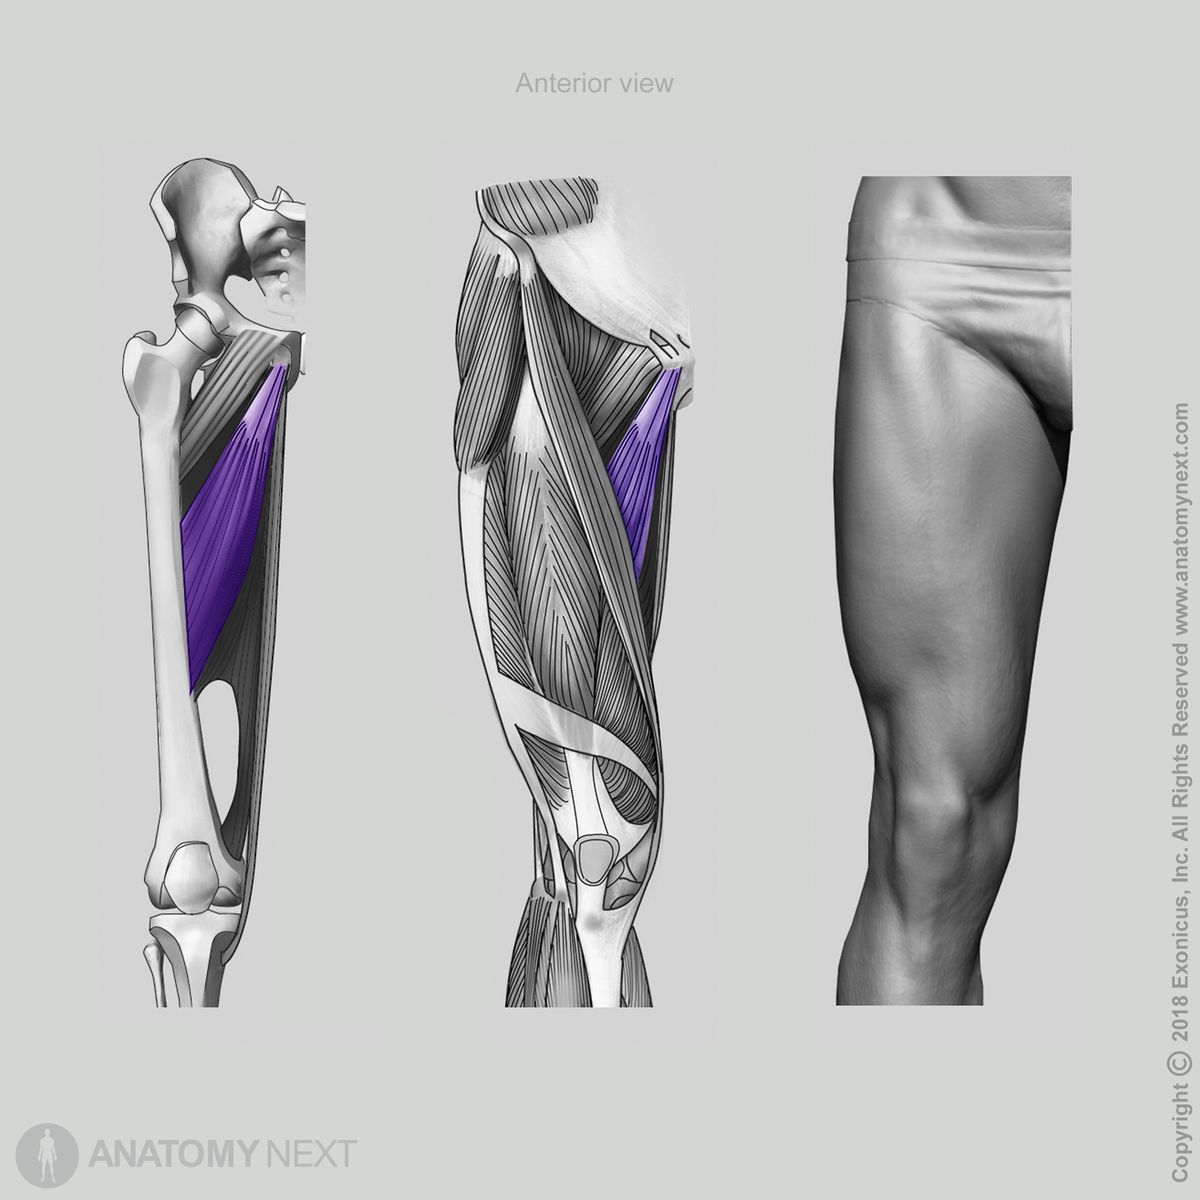 Adductor longus, Anterior view of adductor longus, Hip adductors, Adductor muscles of thigh, Thigh muscles, Medial compartment of thigh, Medial compartment muscles, Human leg, Human muscles